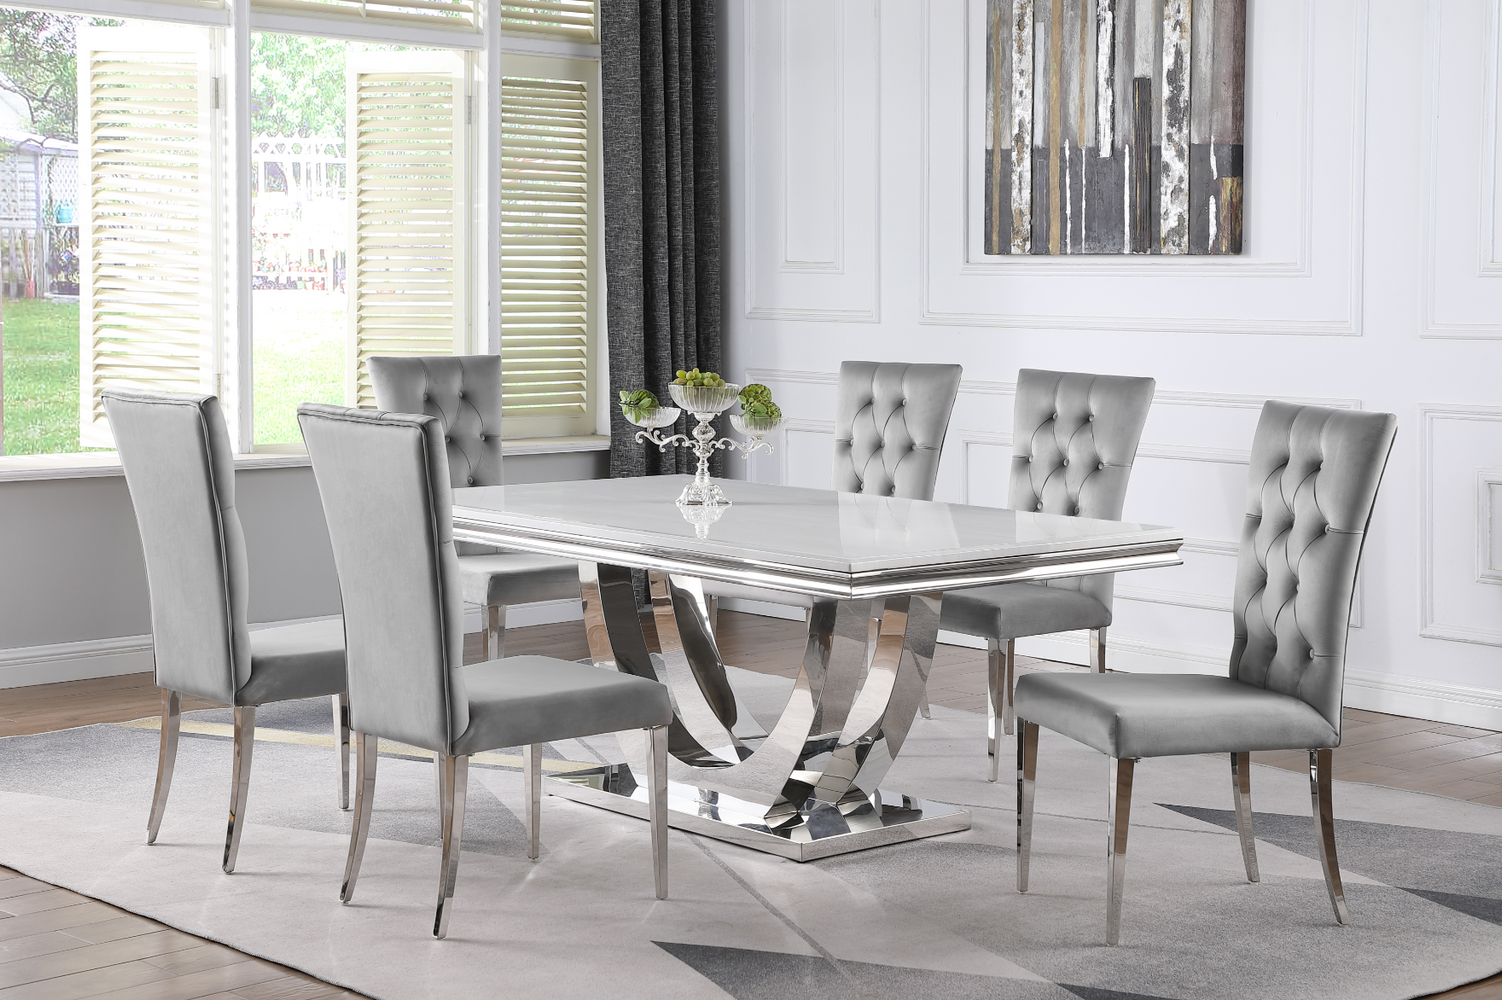 Kerwin Dining Set 7 - Piece Grey or White Chairs